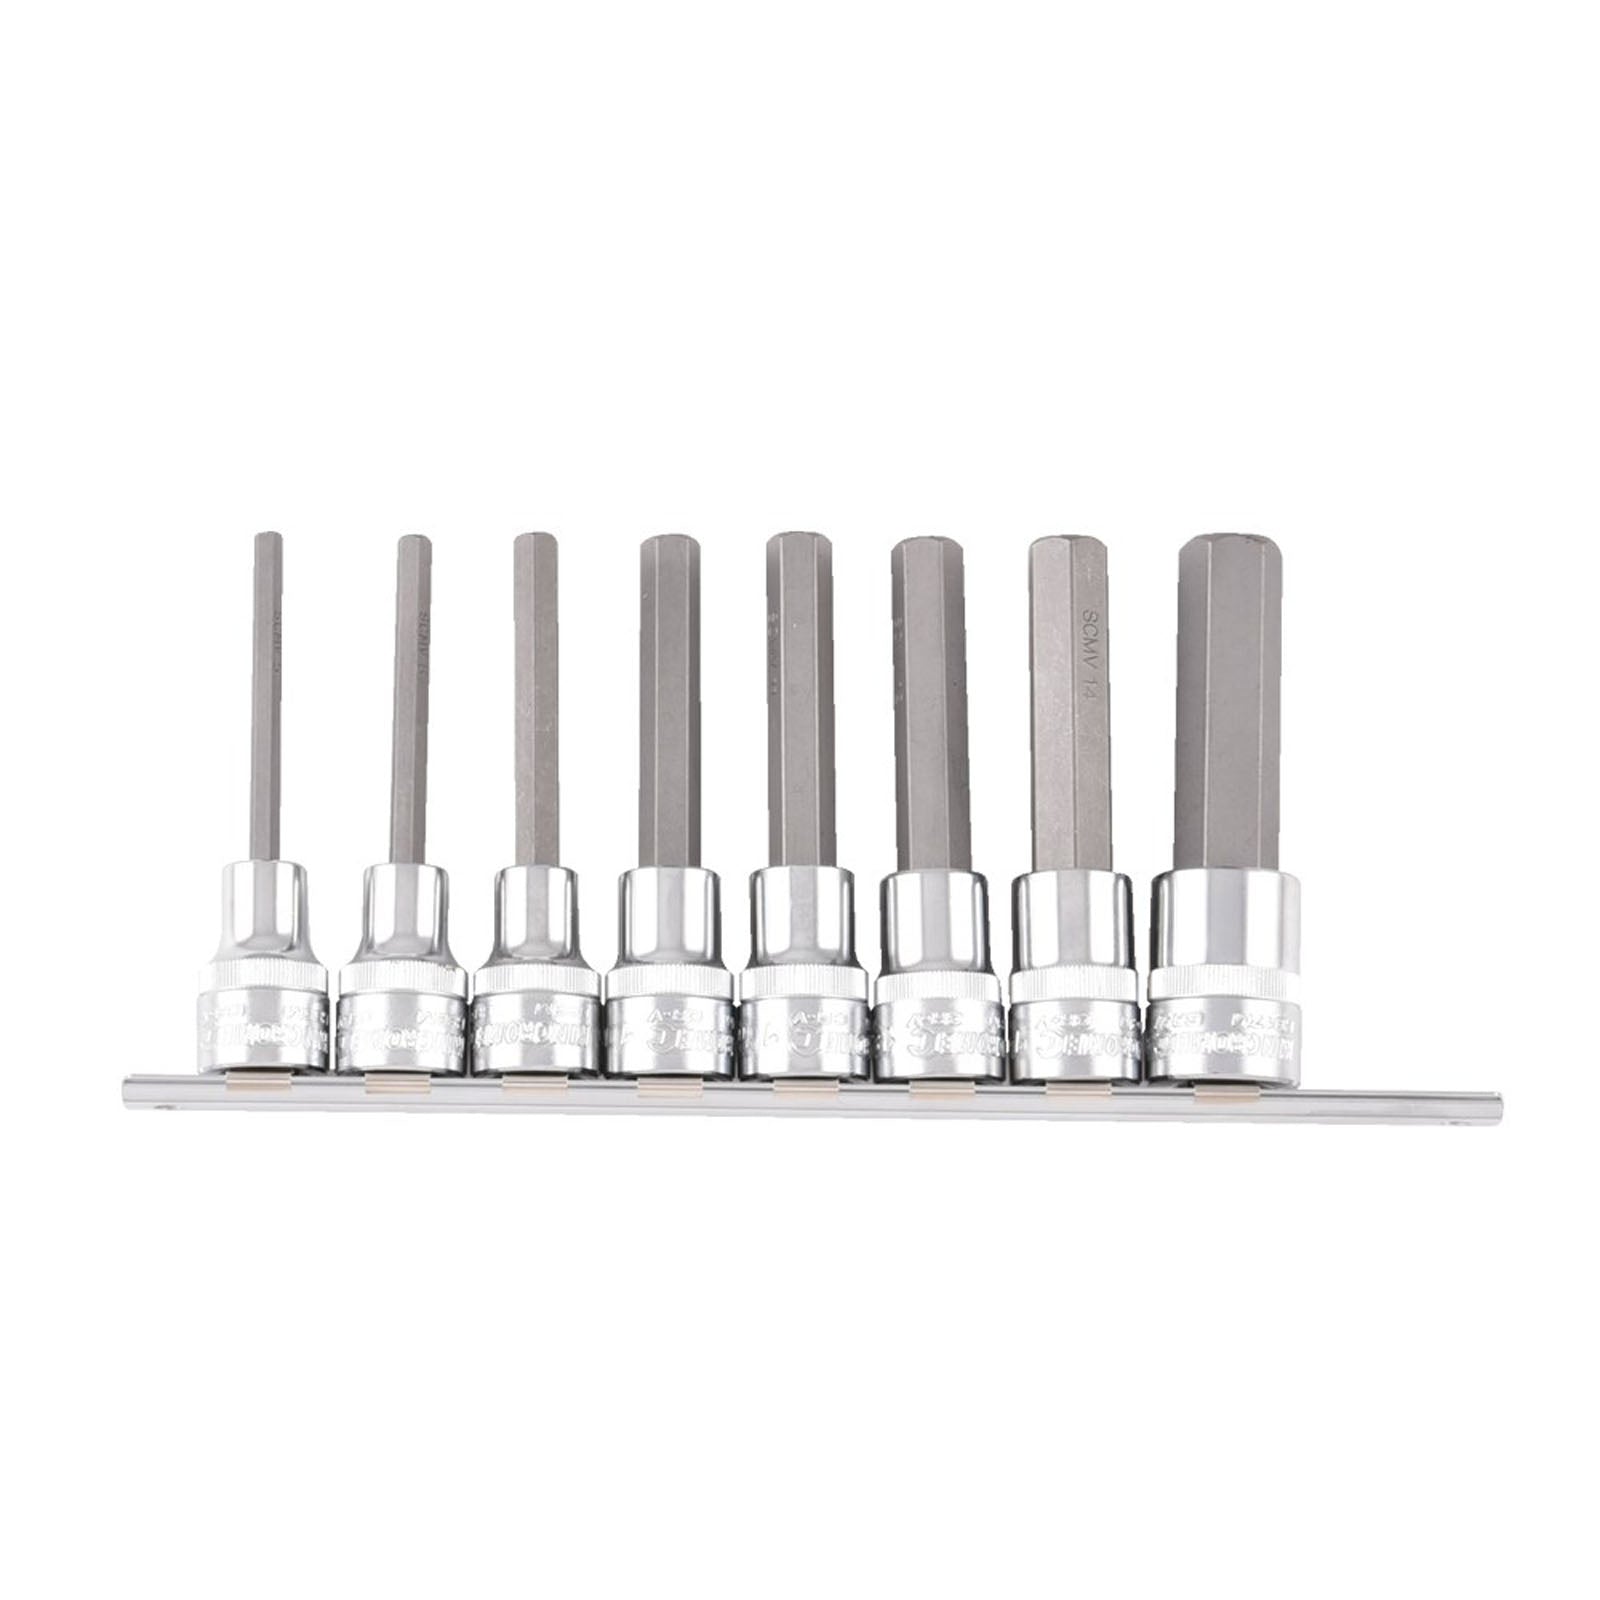 Hex Socket Set 8 Piece 1/2 Drive, Imperial - K2137 by Kincrome